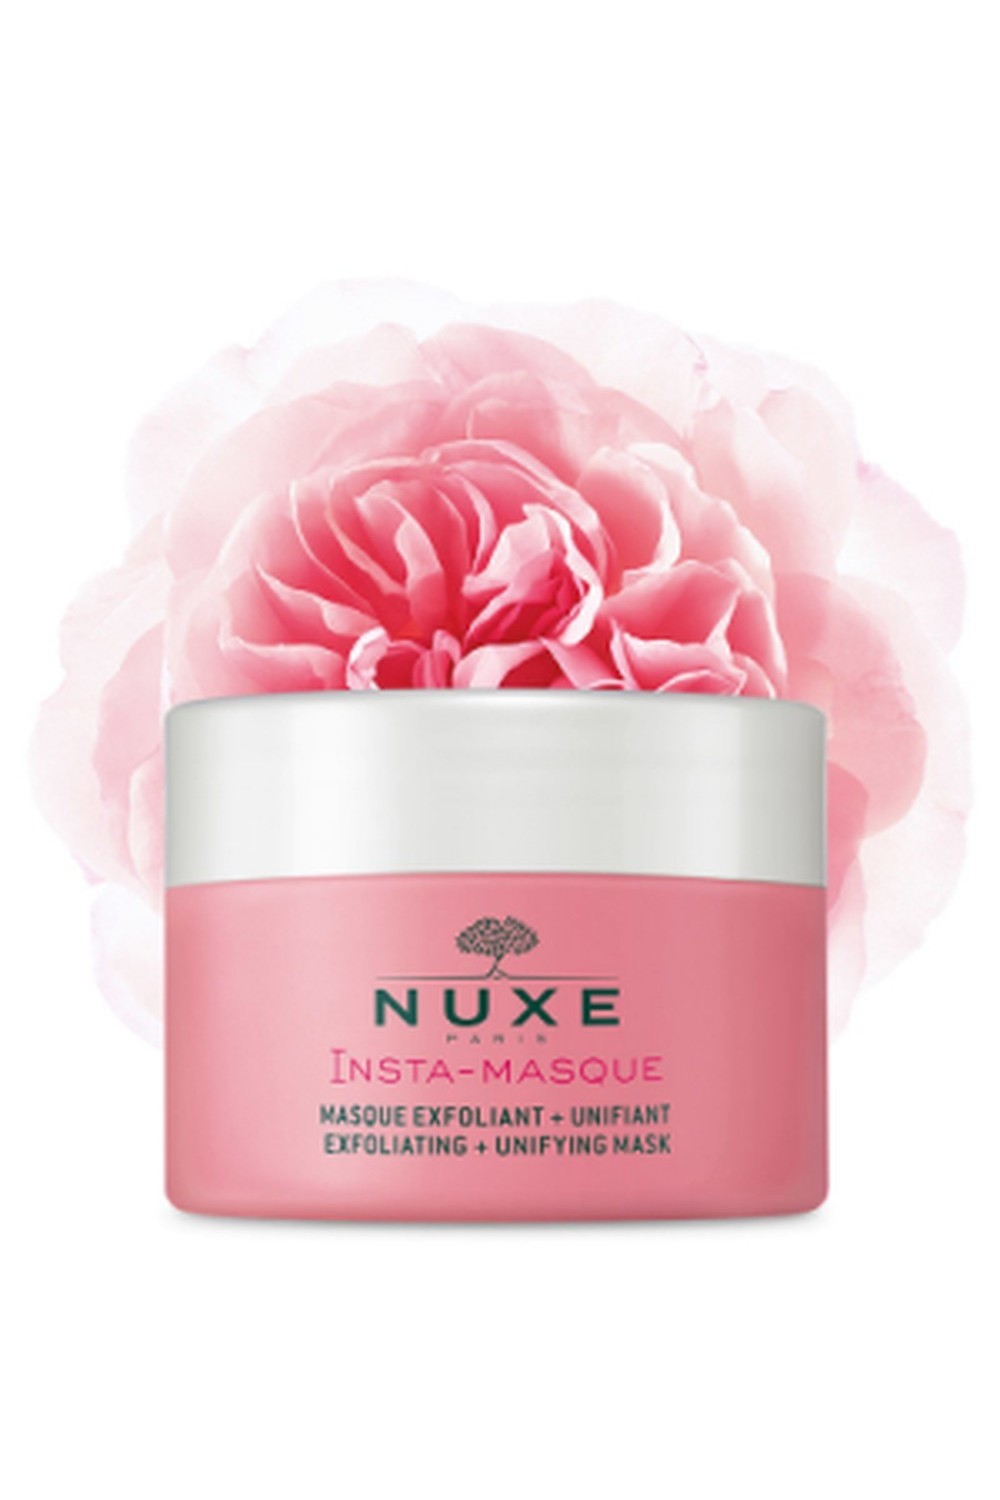 Nuxe Insta-Masque Exfoliating + Unifying Mask Rose And Macadamia 50ml